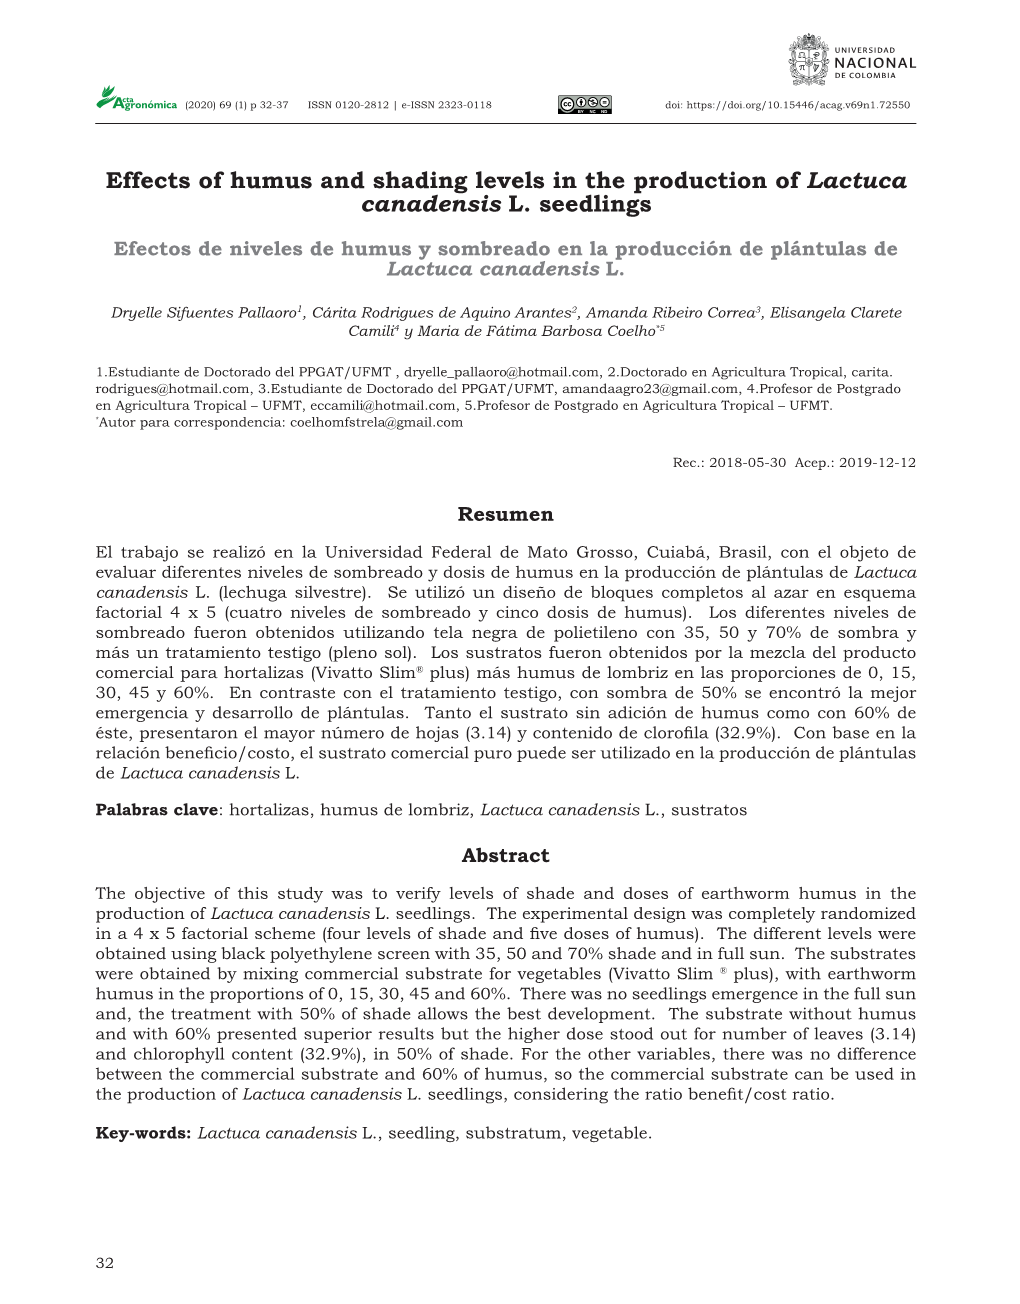 Effects of Humus and Shading Levels in the Production of Lactuca Canadensis L